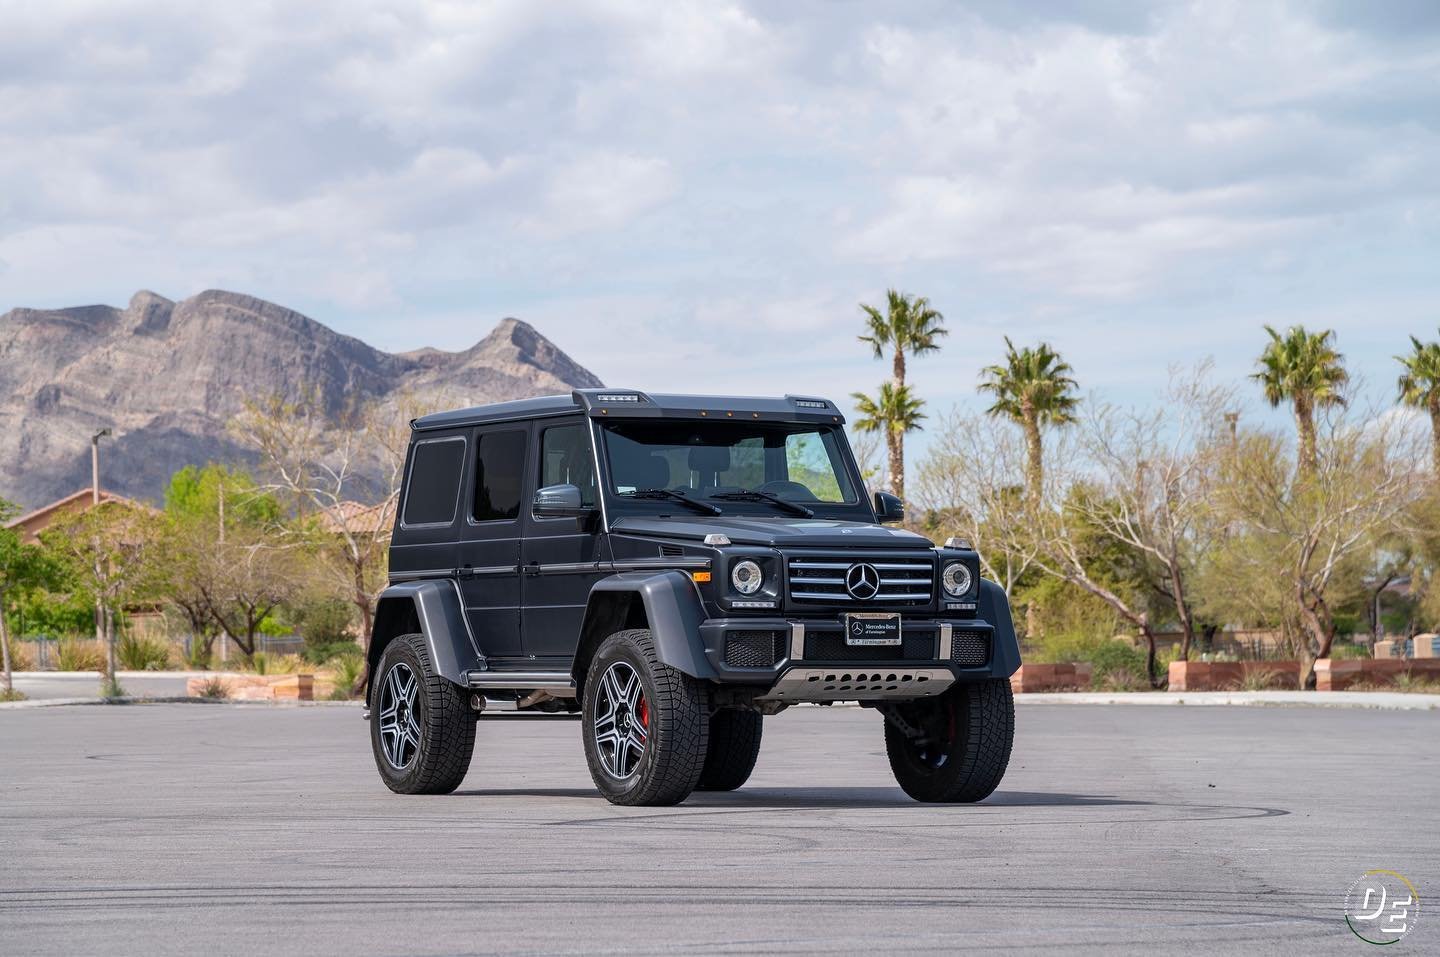 The - when you want to go anywhere in style vehicle...

If the idea of owning a G550 4x4&sup2; piques your interest, here is our latest auction on @bringatrailer.

Whether you want to watch, comment, share, or maybe place a bid - here is one awesome 